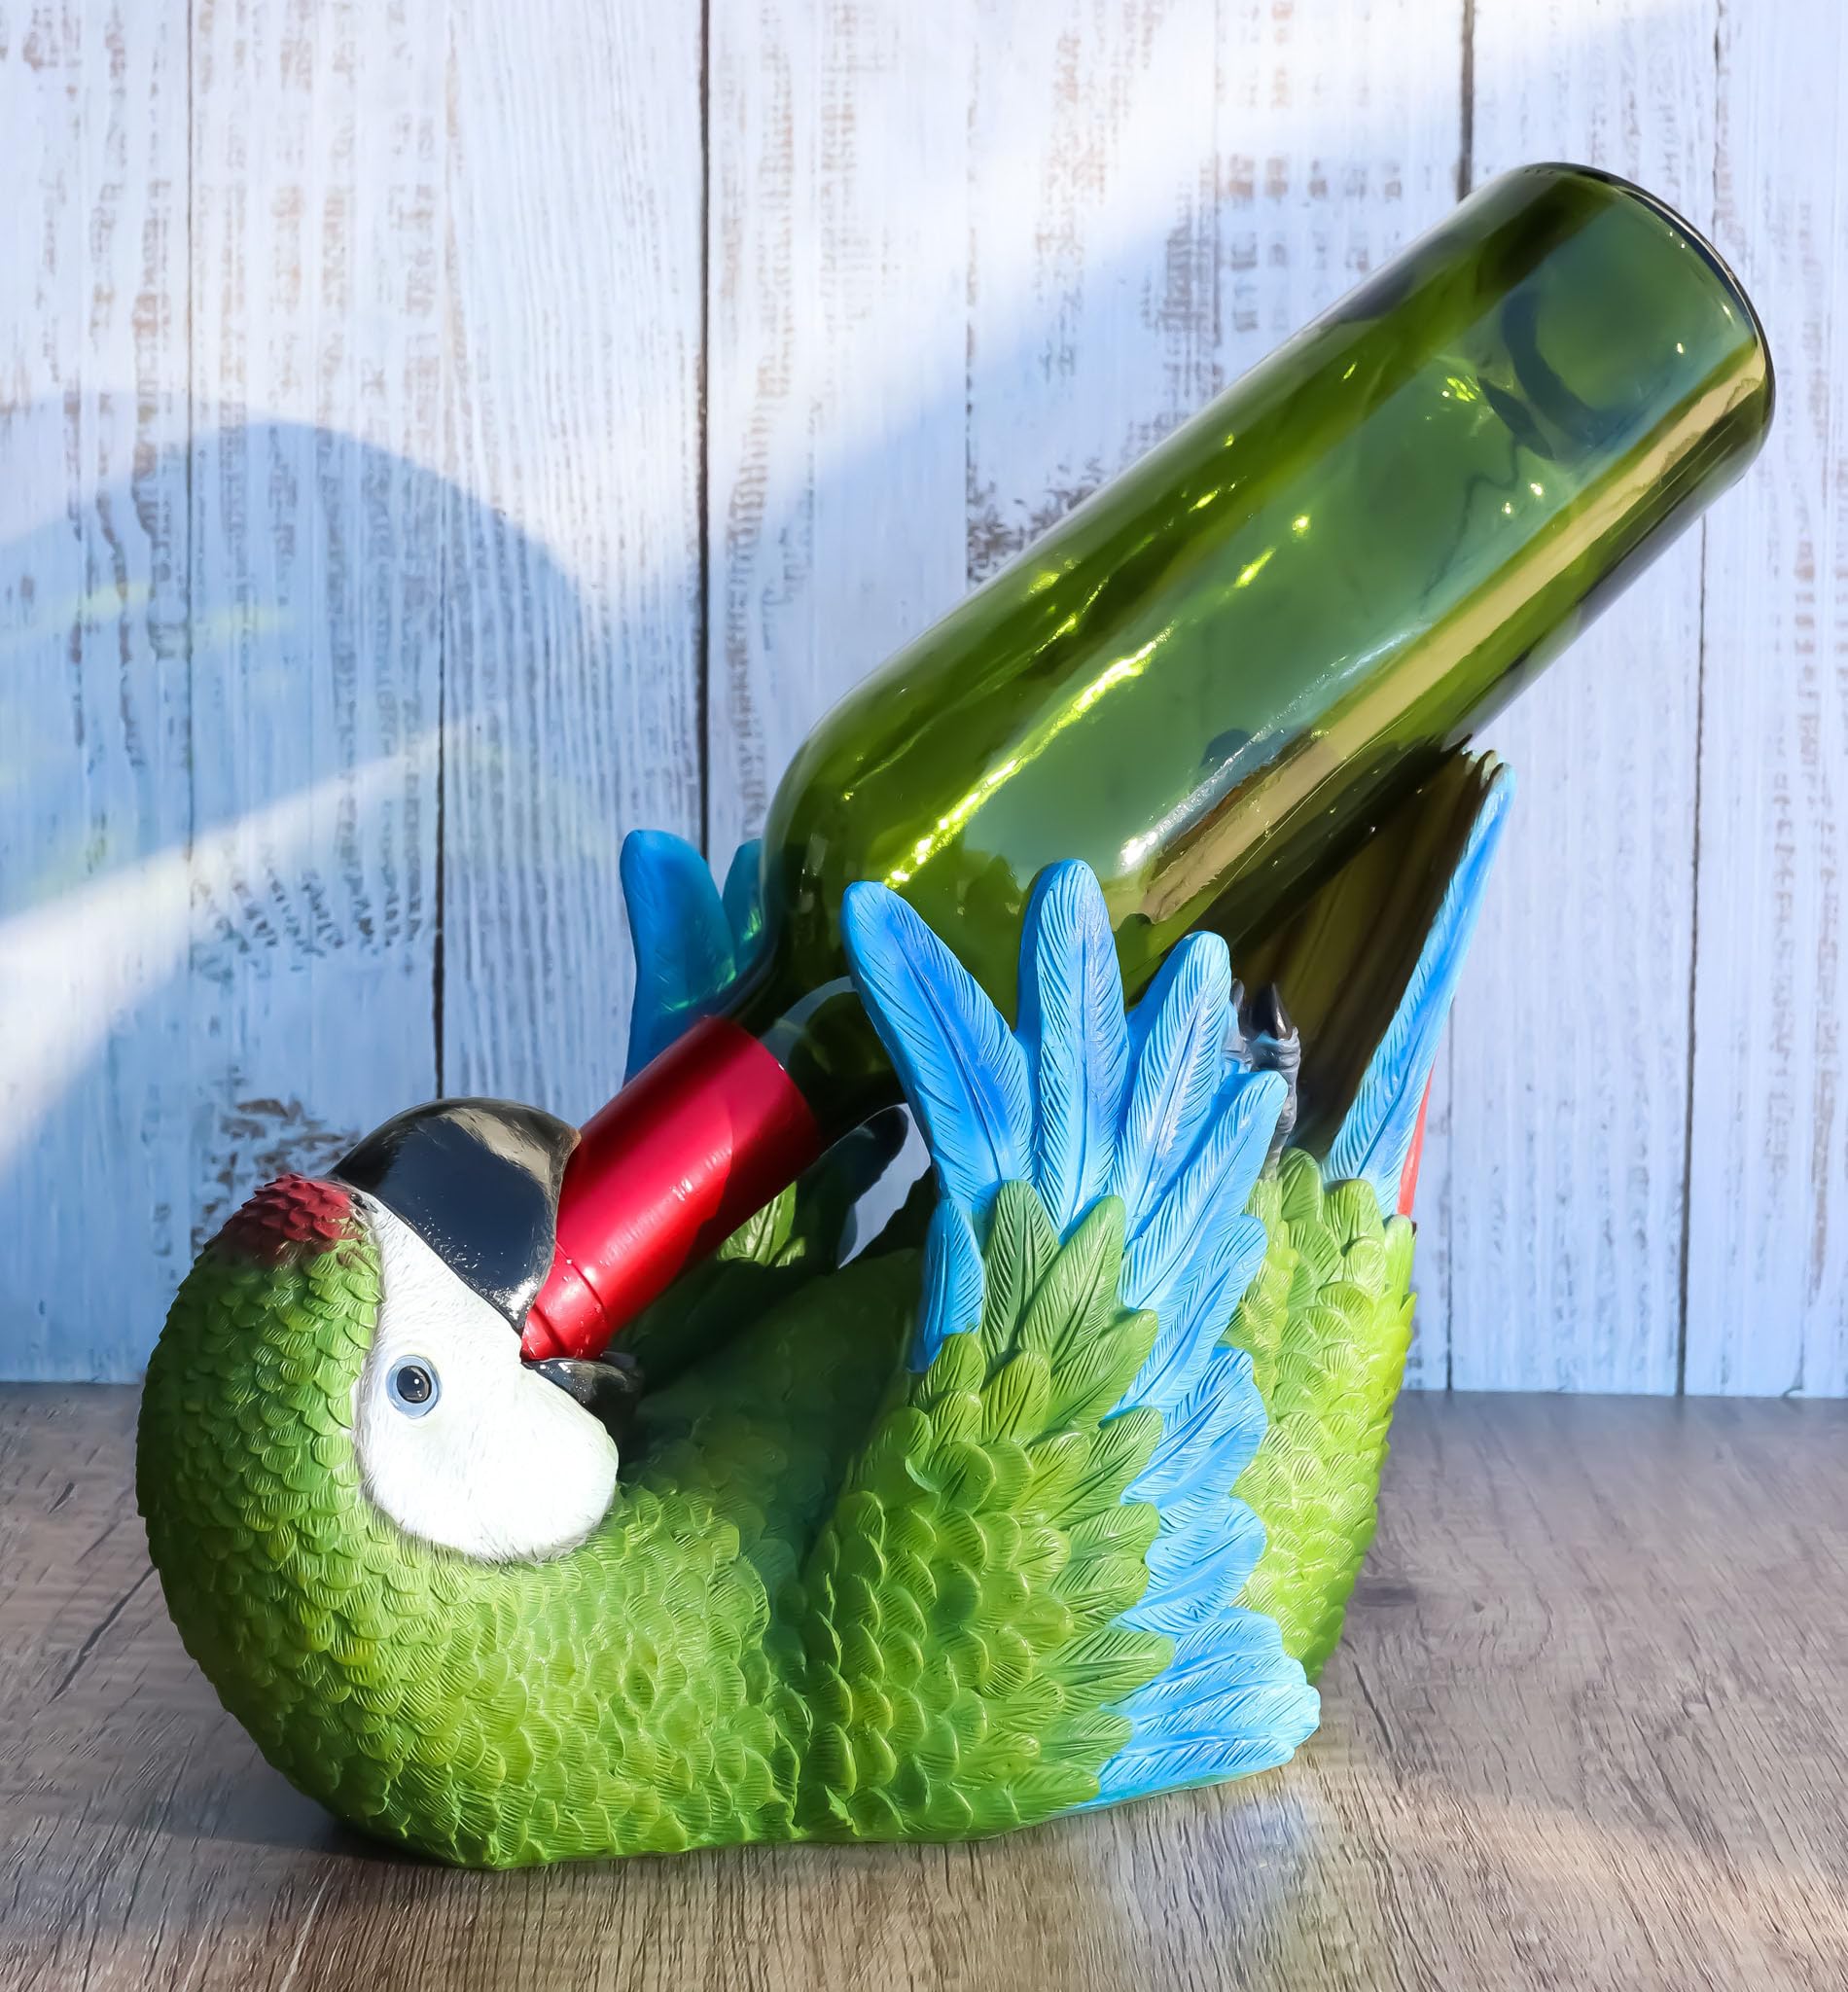 Ebros Gift Tropical Rio Rainforest Scarlet Macaw Parrot Wine Bottle Holder Caddy Figurine 10.25" Long Kitchen Dining Party Hosting Decor Statue of South American Evergreen Forest Birds (Green Macaw)